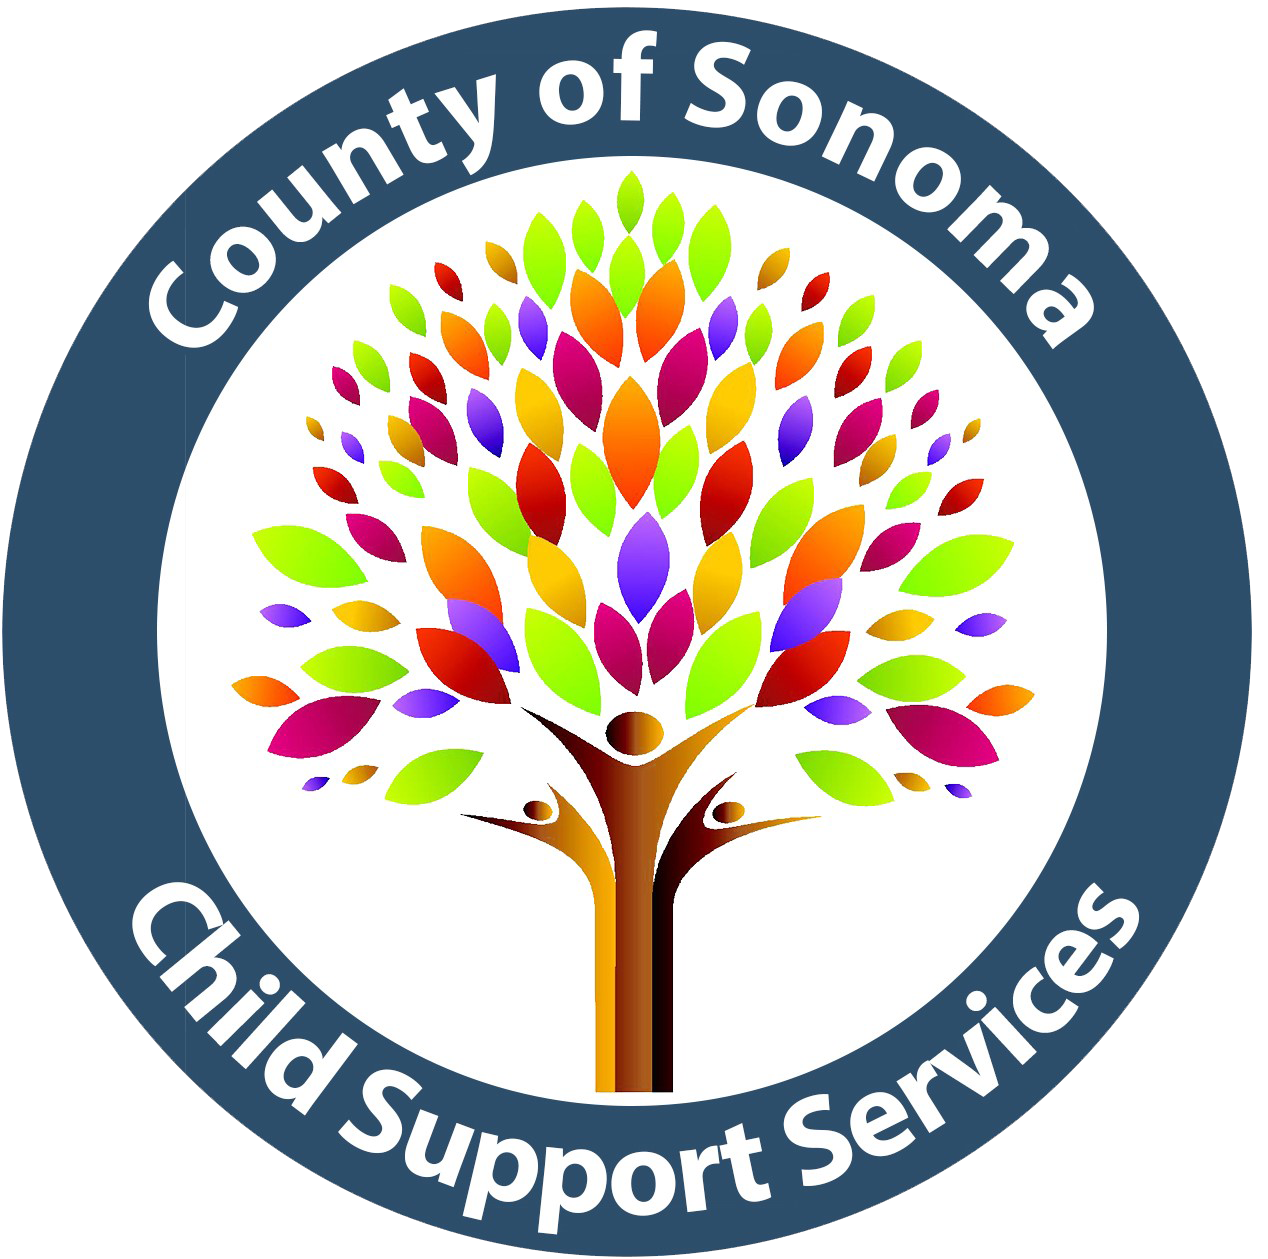 County of Sonoma Child Support Services logo